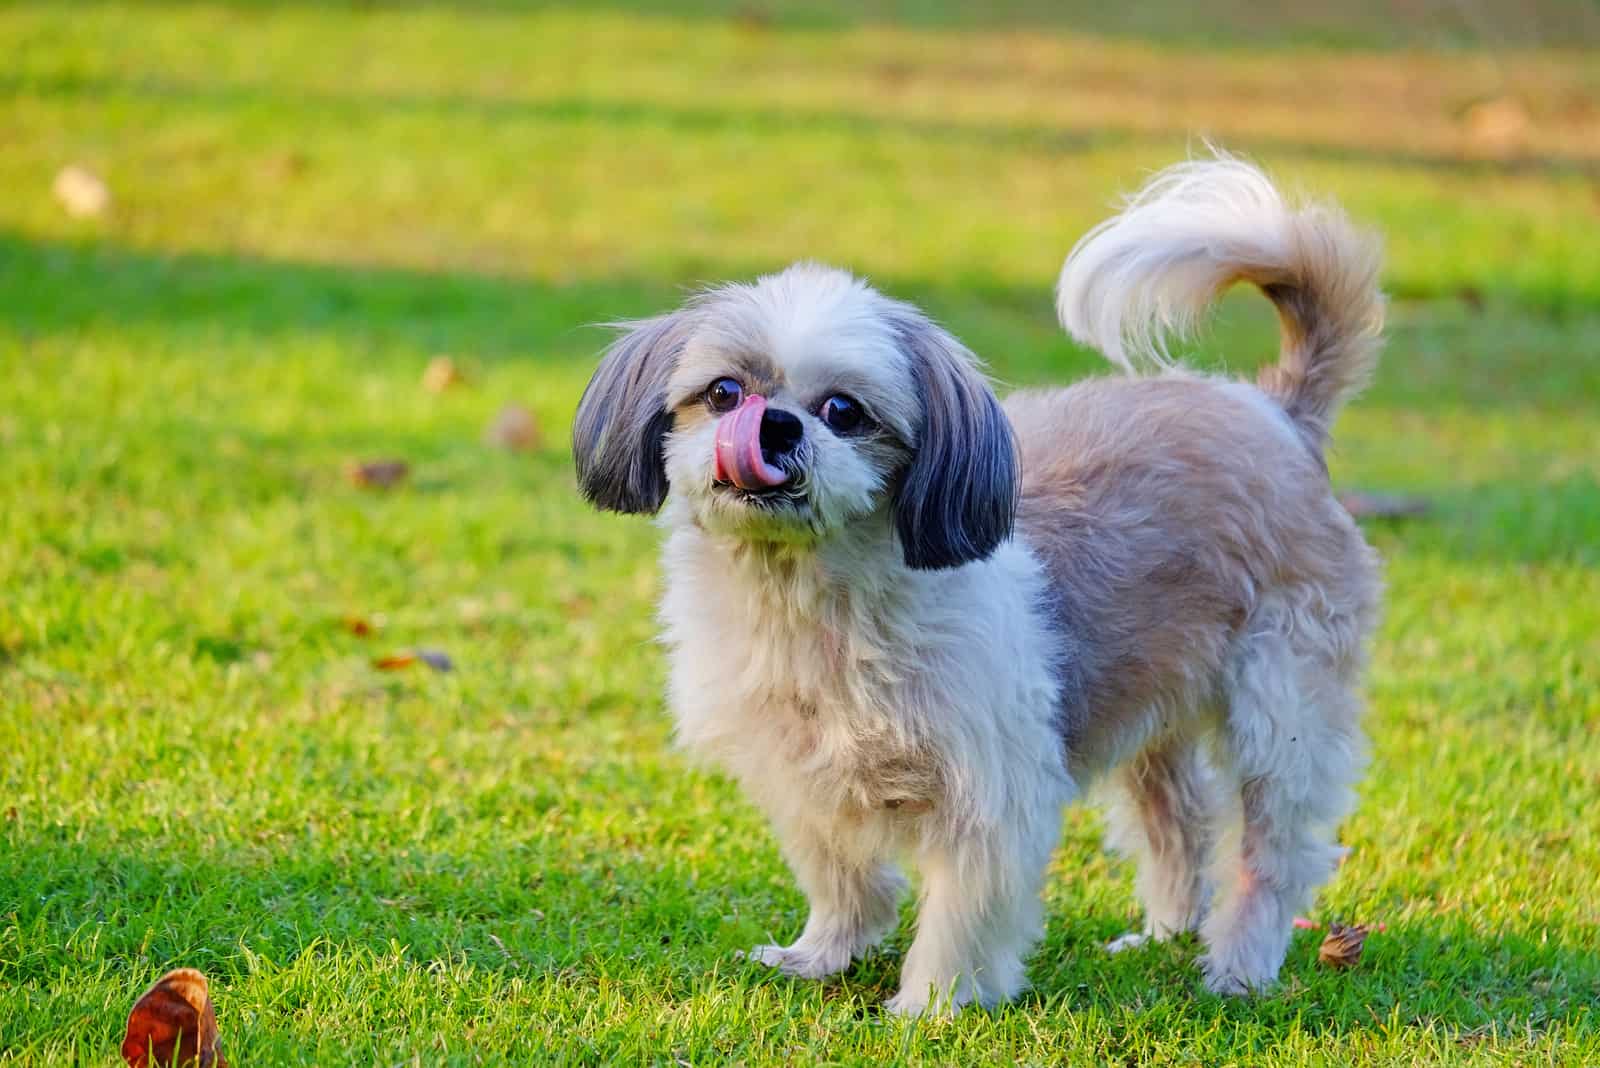 Shih Tzu dog standing and making cheeky face on grass